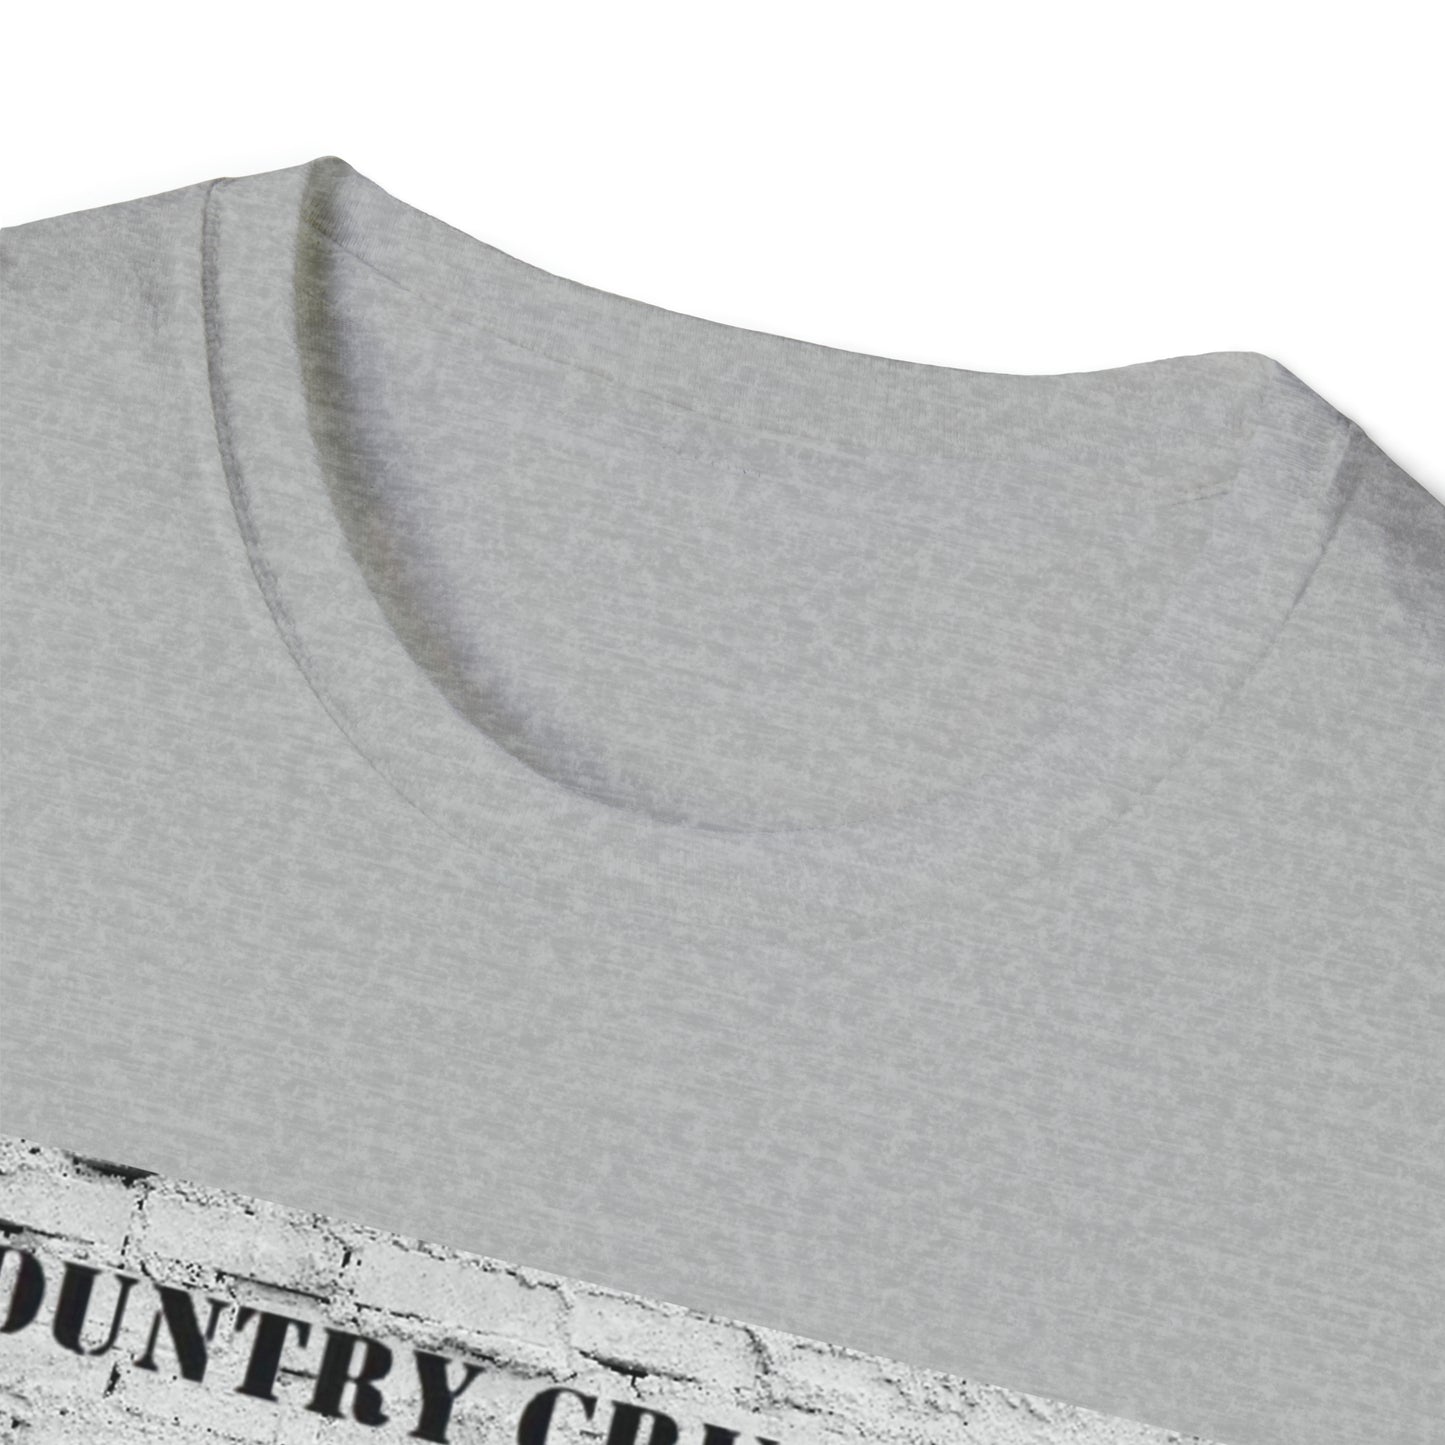 Country Cruzerz - Outlaw Unisex Softstyle T-Shirt